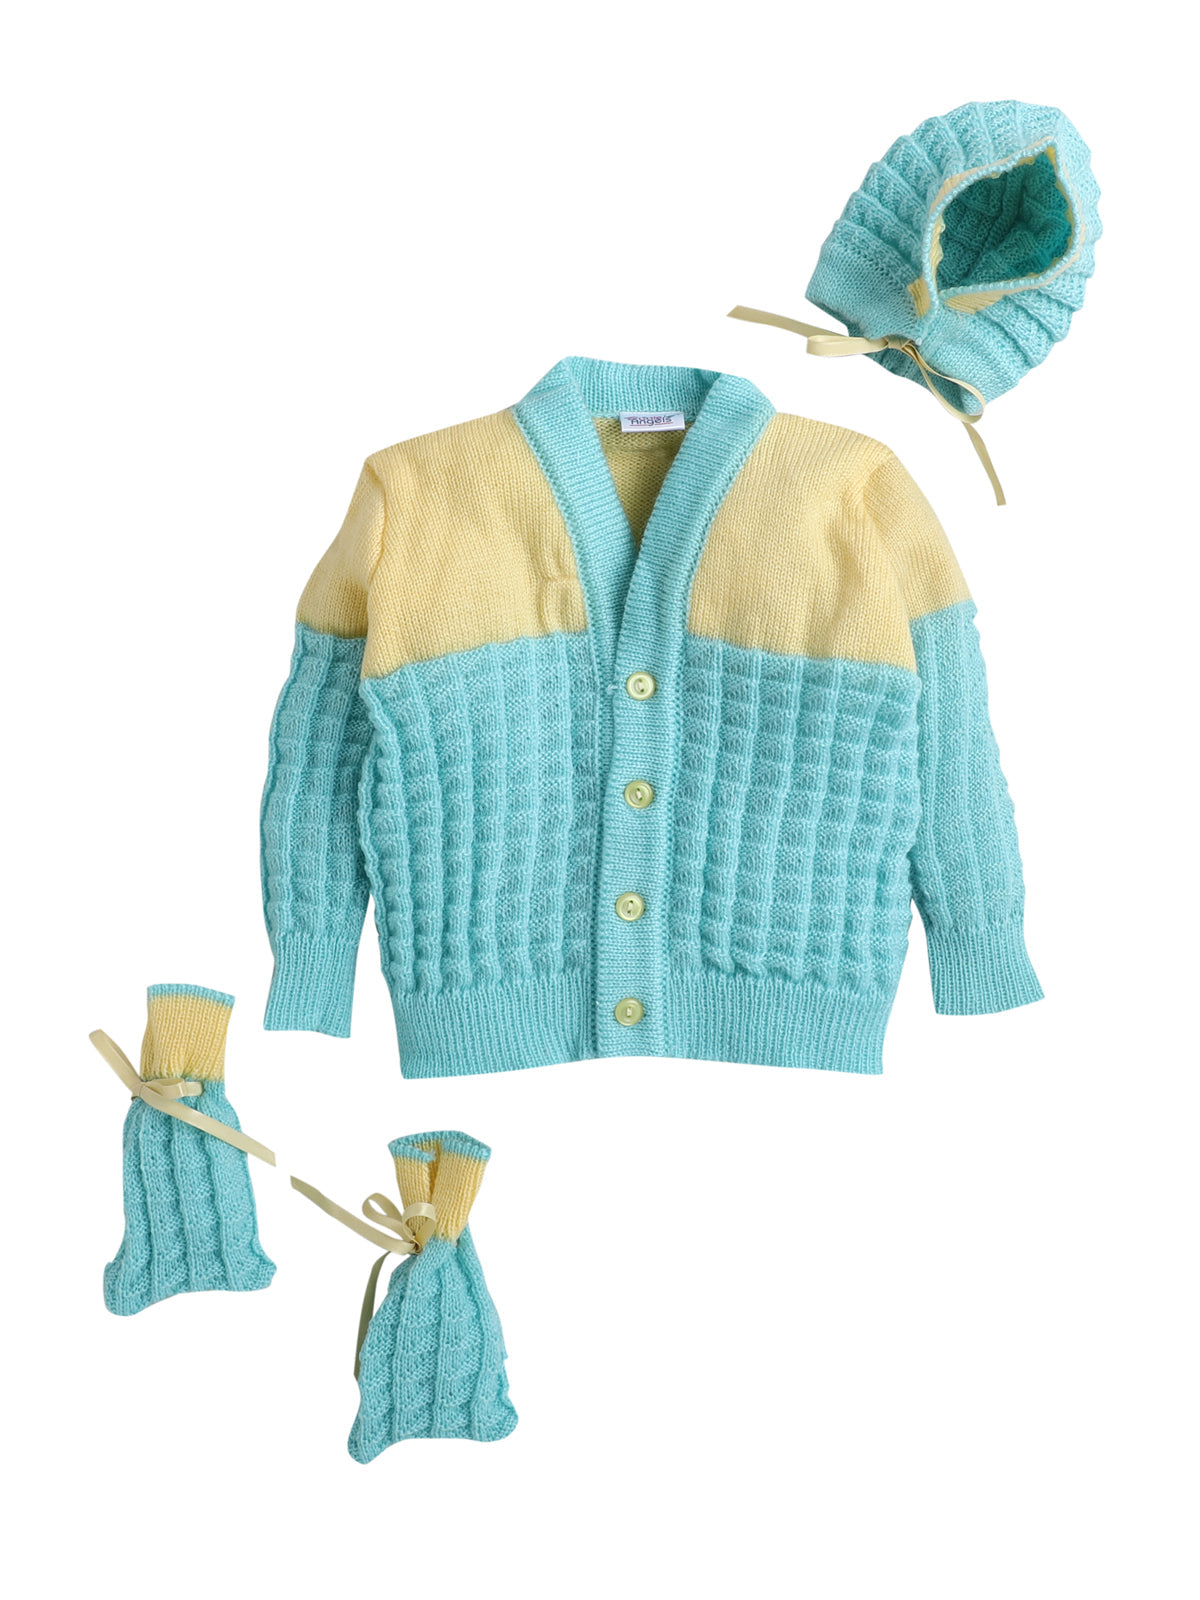 Adorable And Cozy Sweater Set for Babies